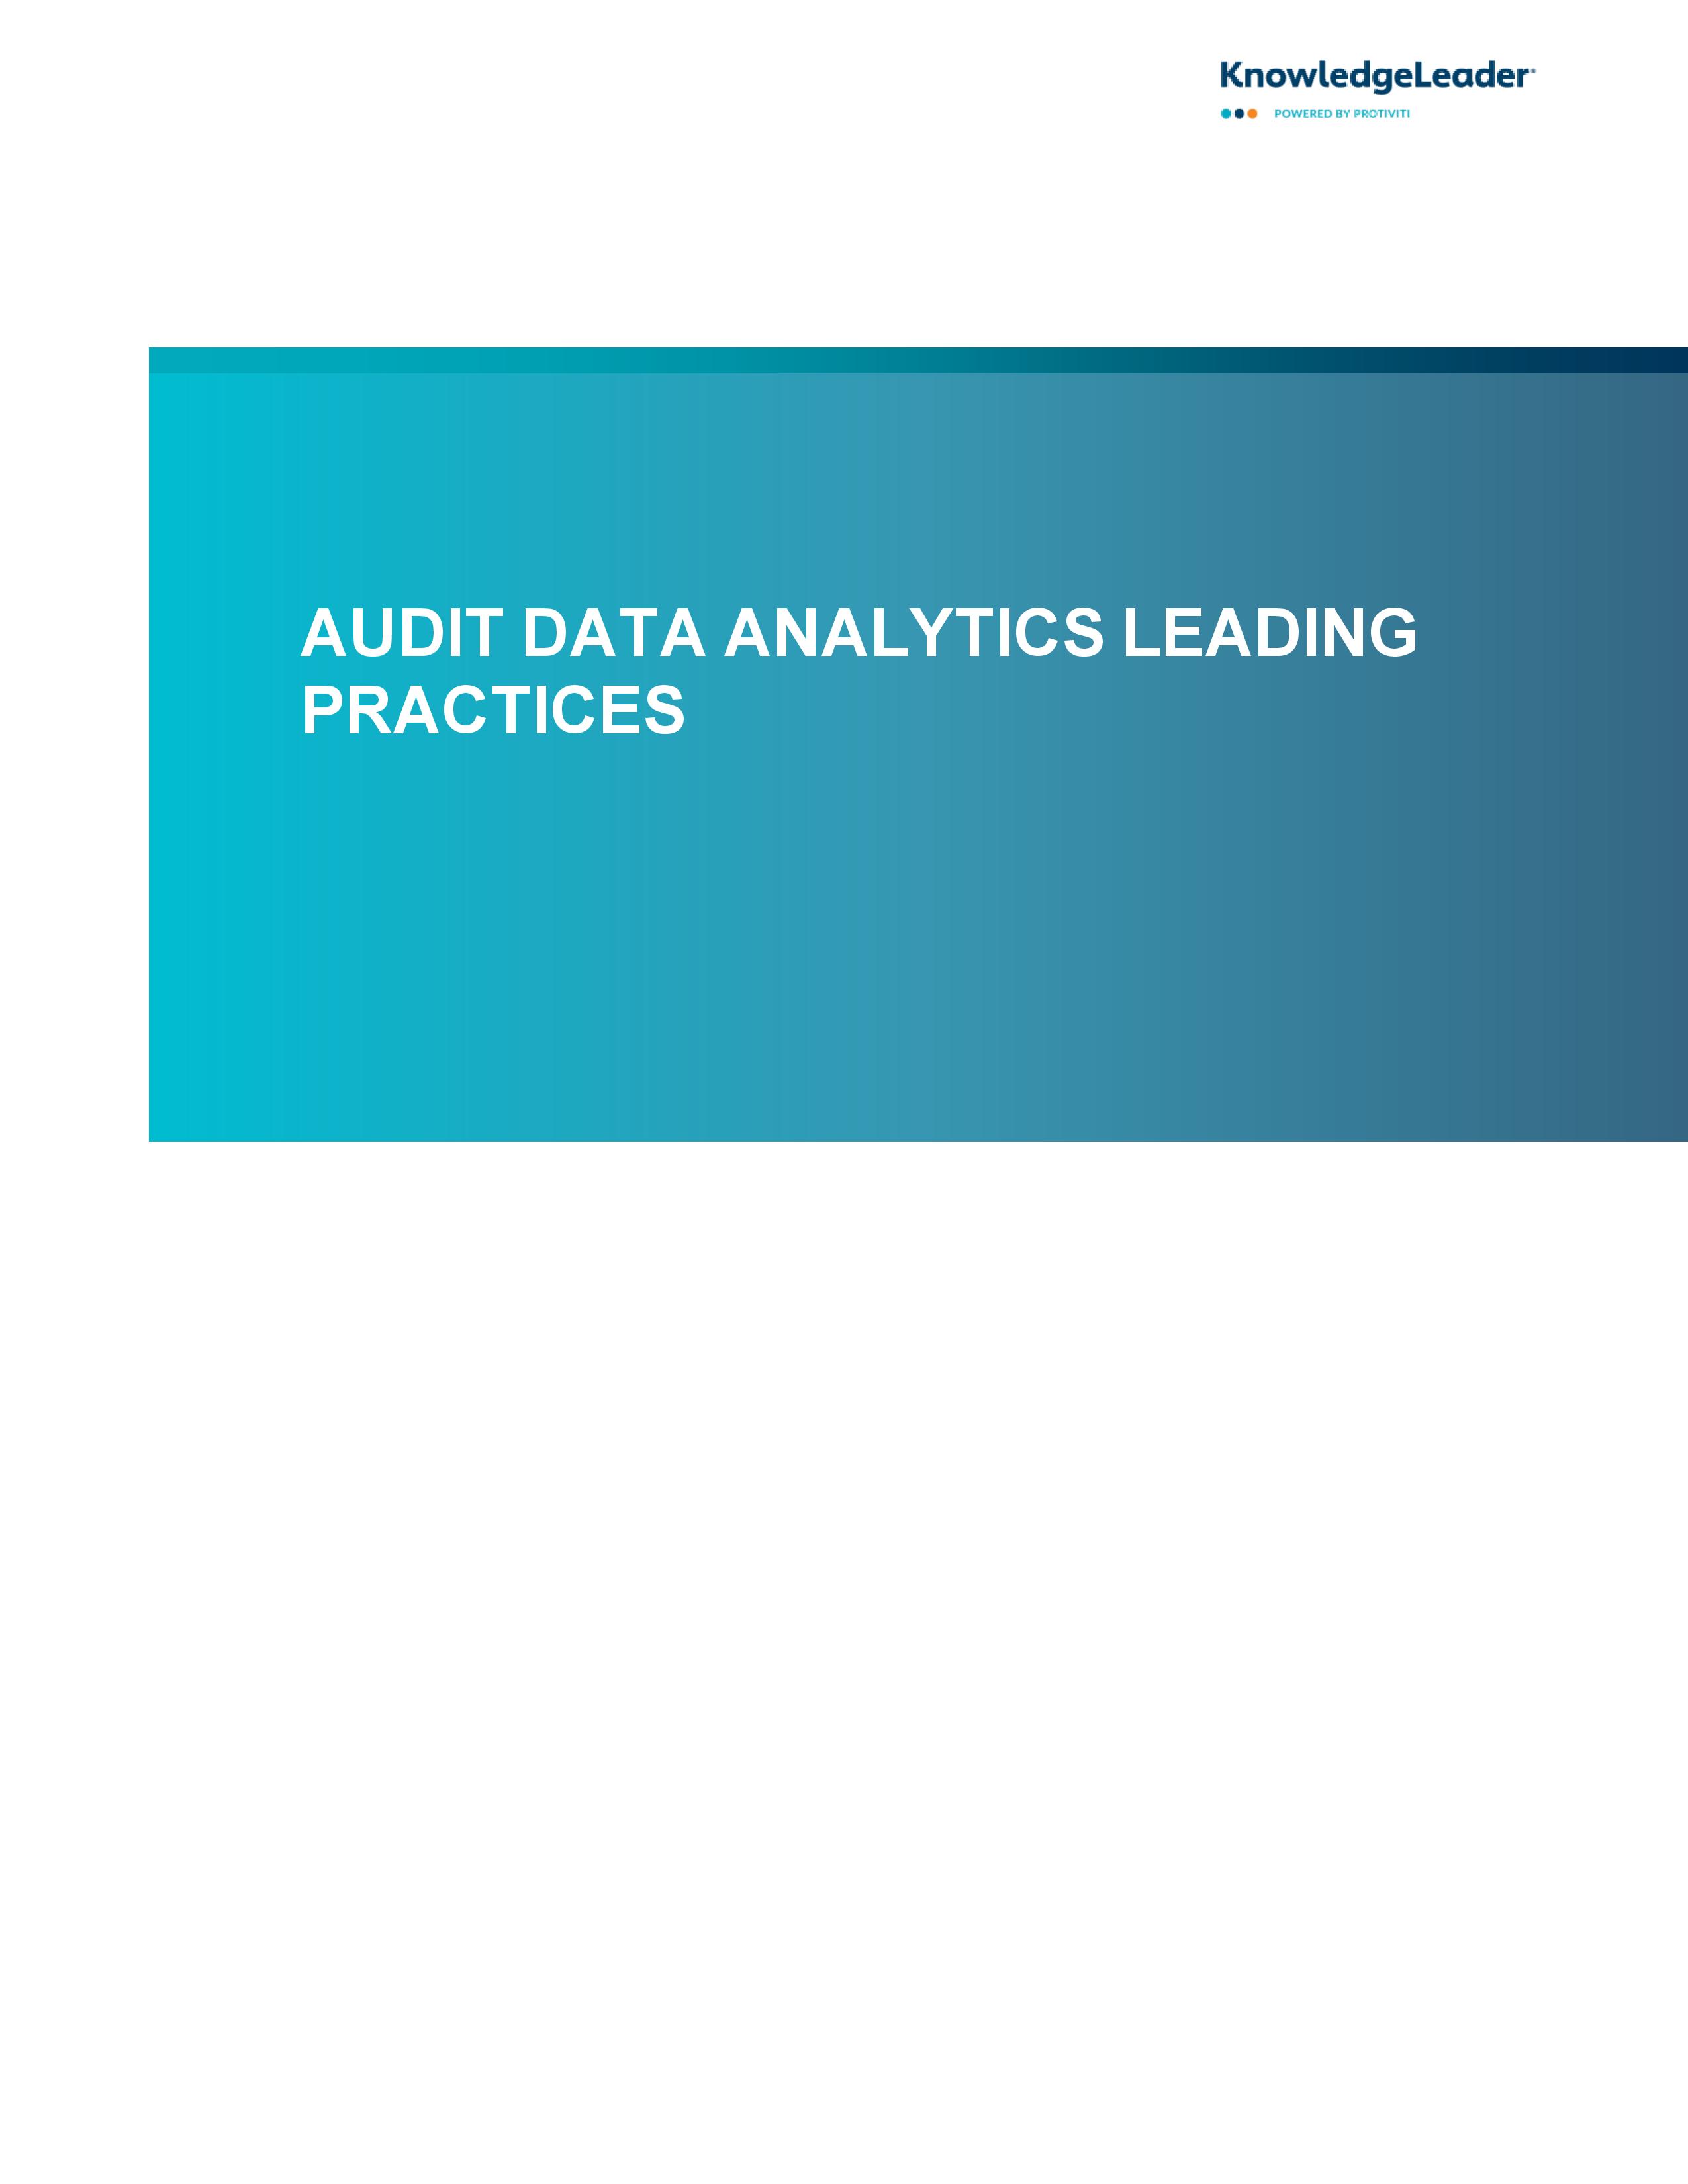 Screenshot of the first page of Audit Data Analytics Leading Practices